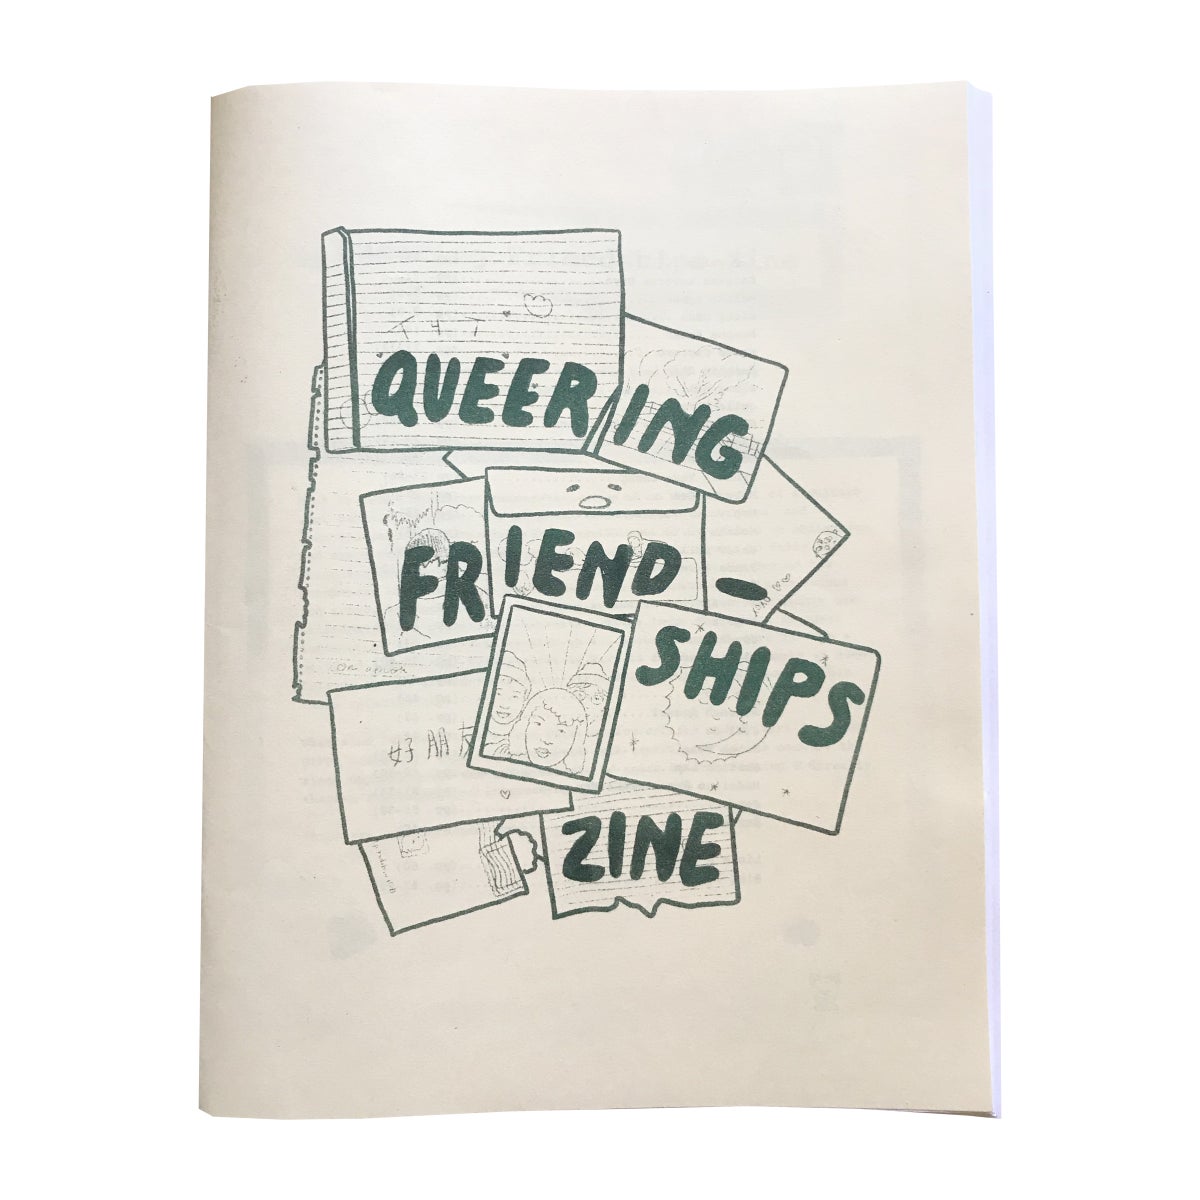 My First Ever Poetry Zine Is Now Available On Look For My, 45% OFF